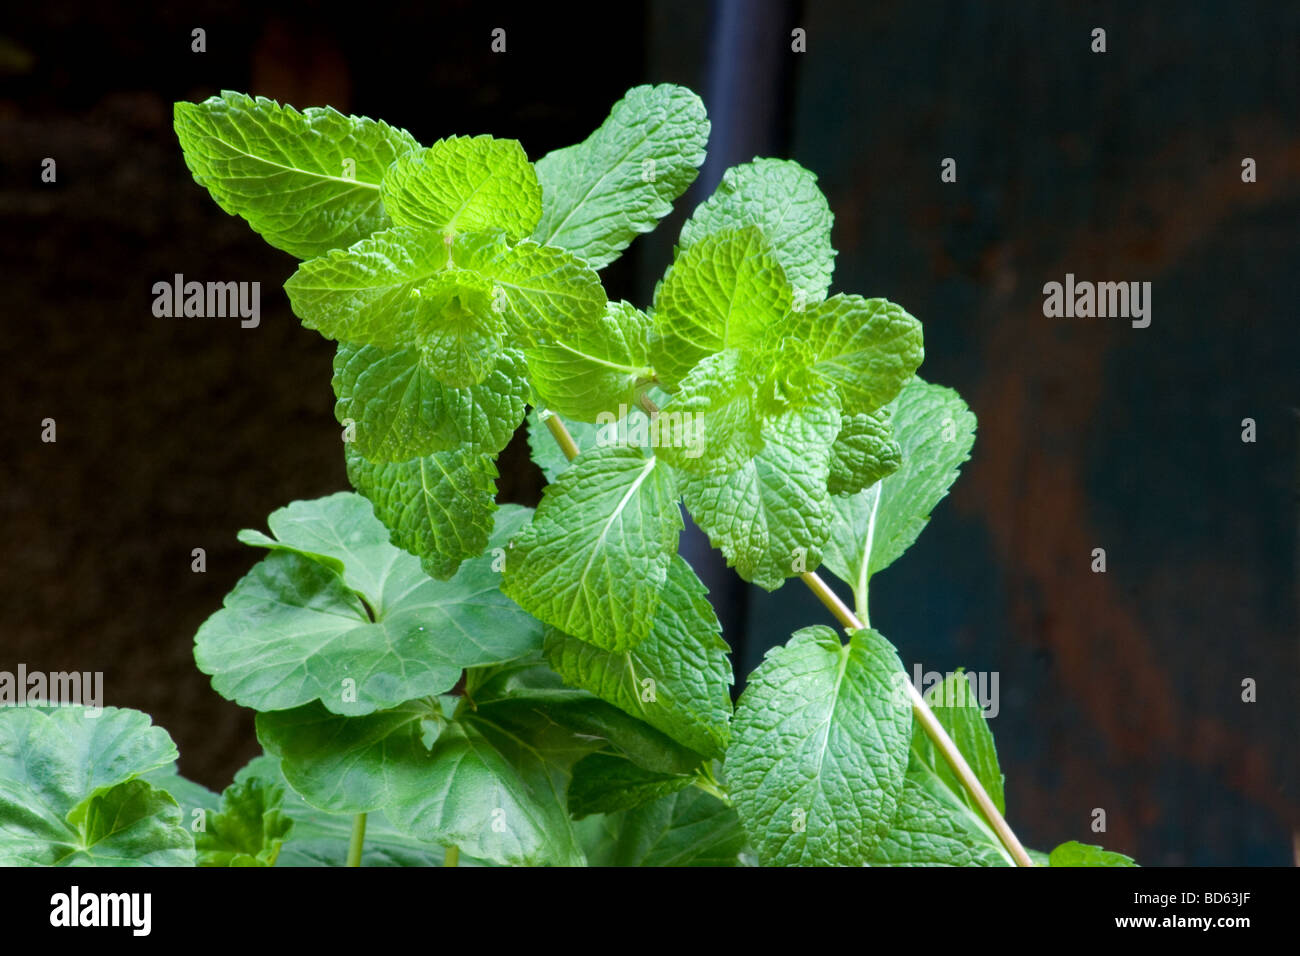 Close-up of mint plant on herbal garden Stock Photo